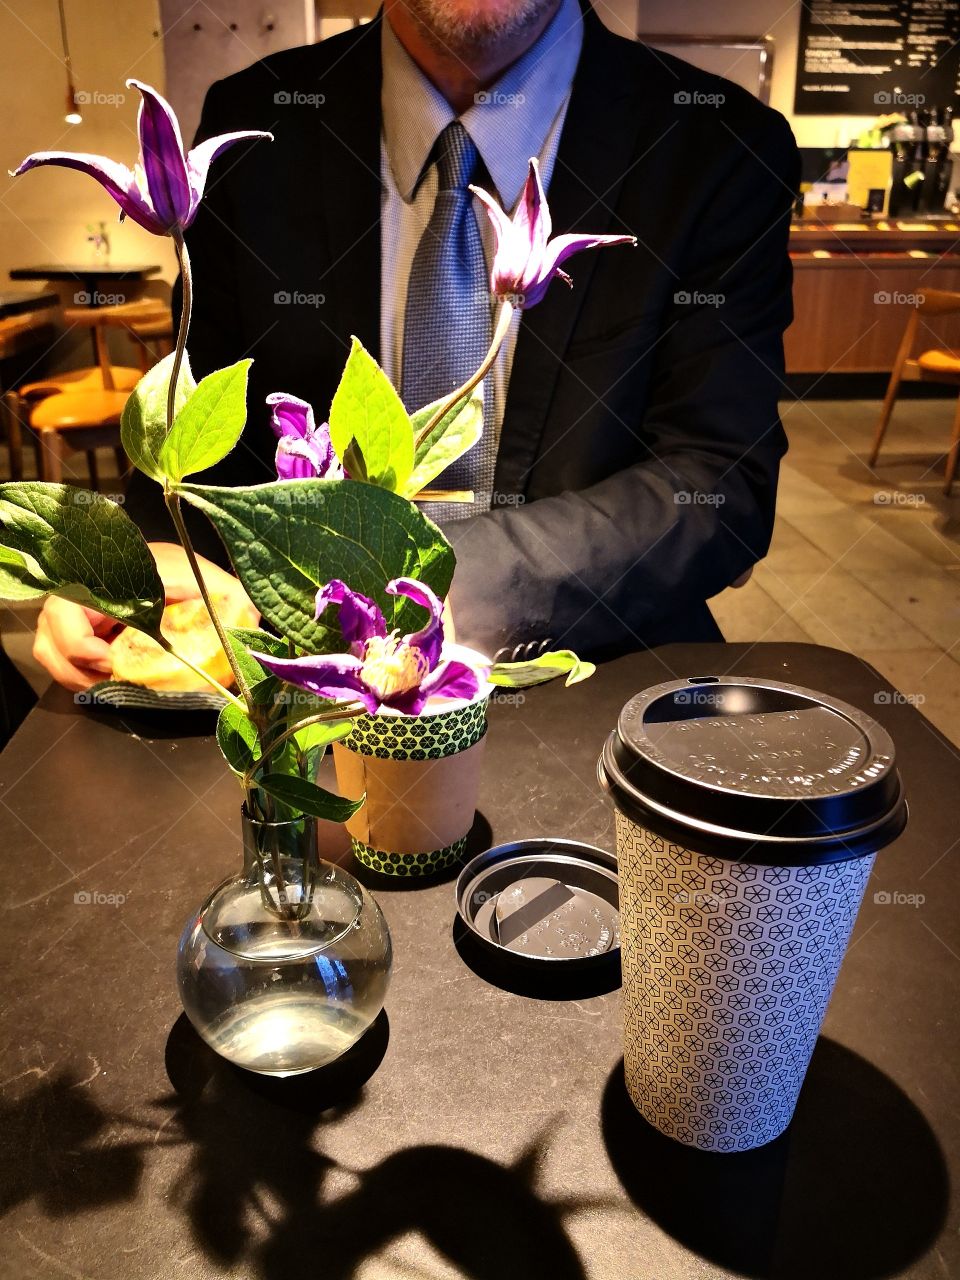 Coffee with a gentleman.